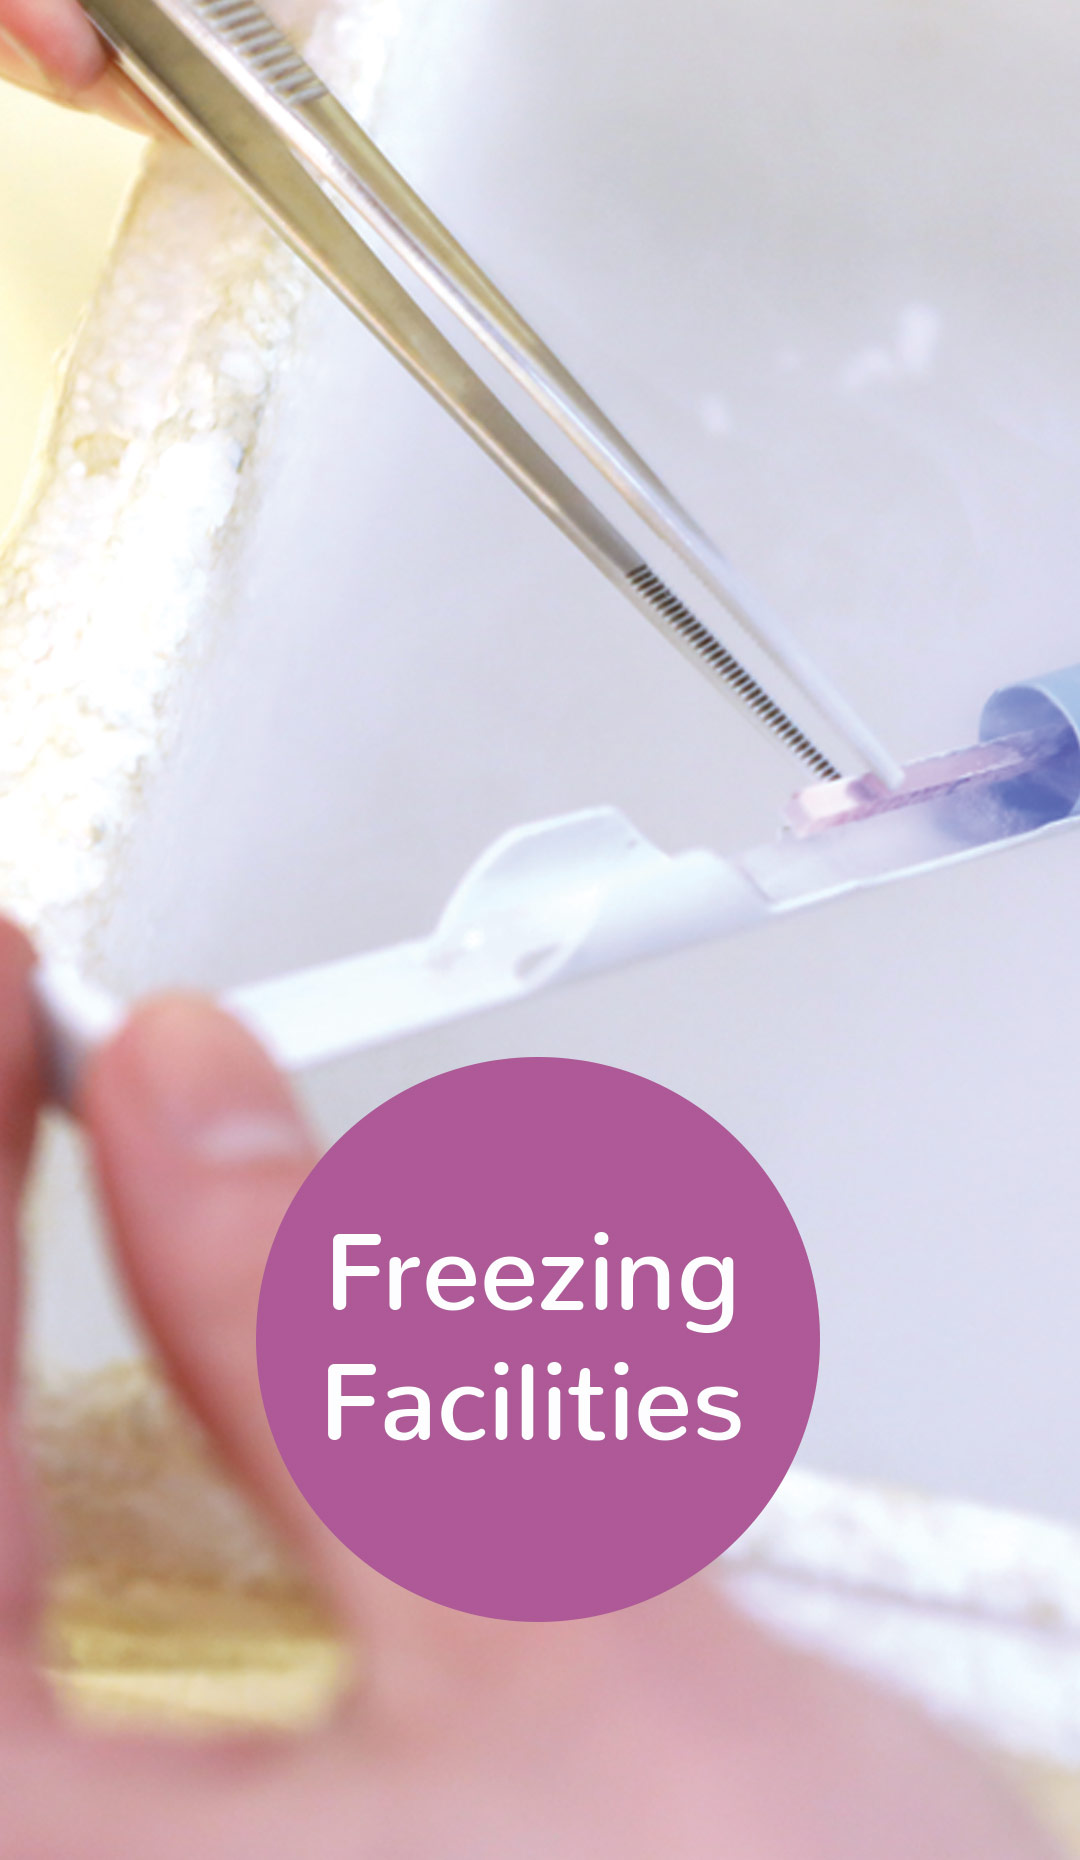 Oocyte and Sperm Freezing Servicesin Hyderabad